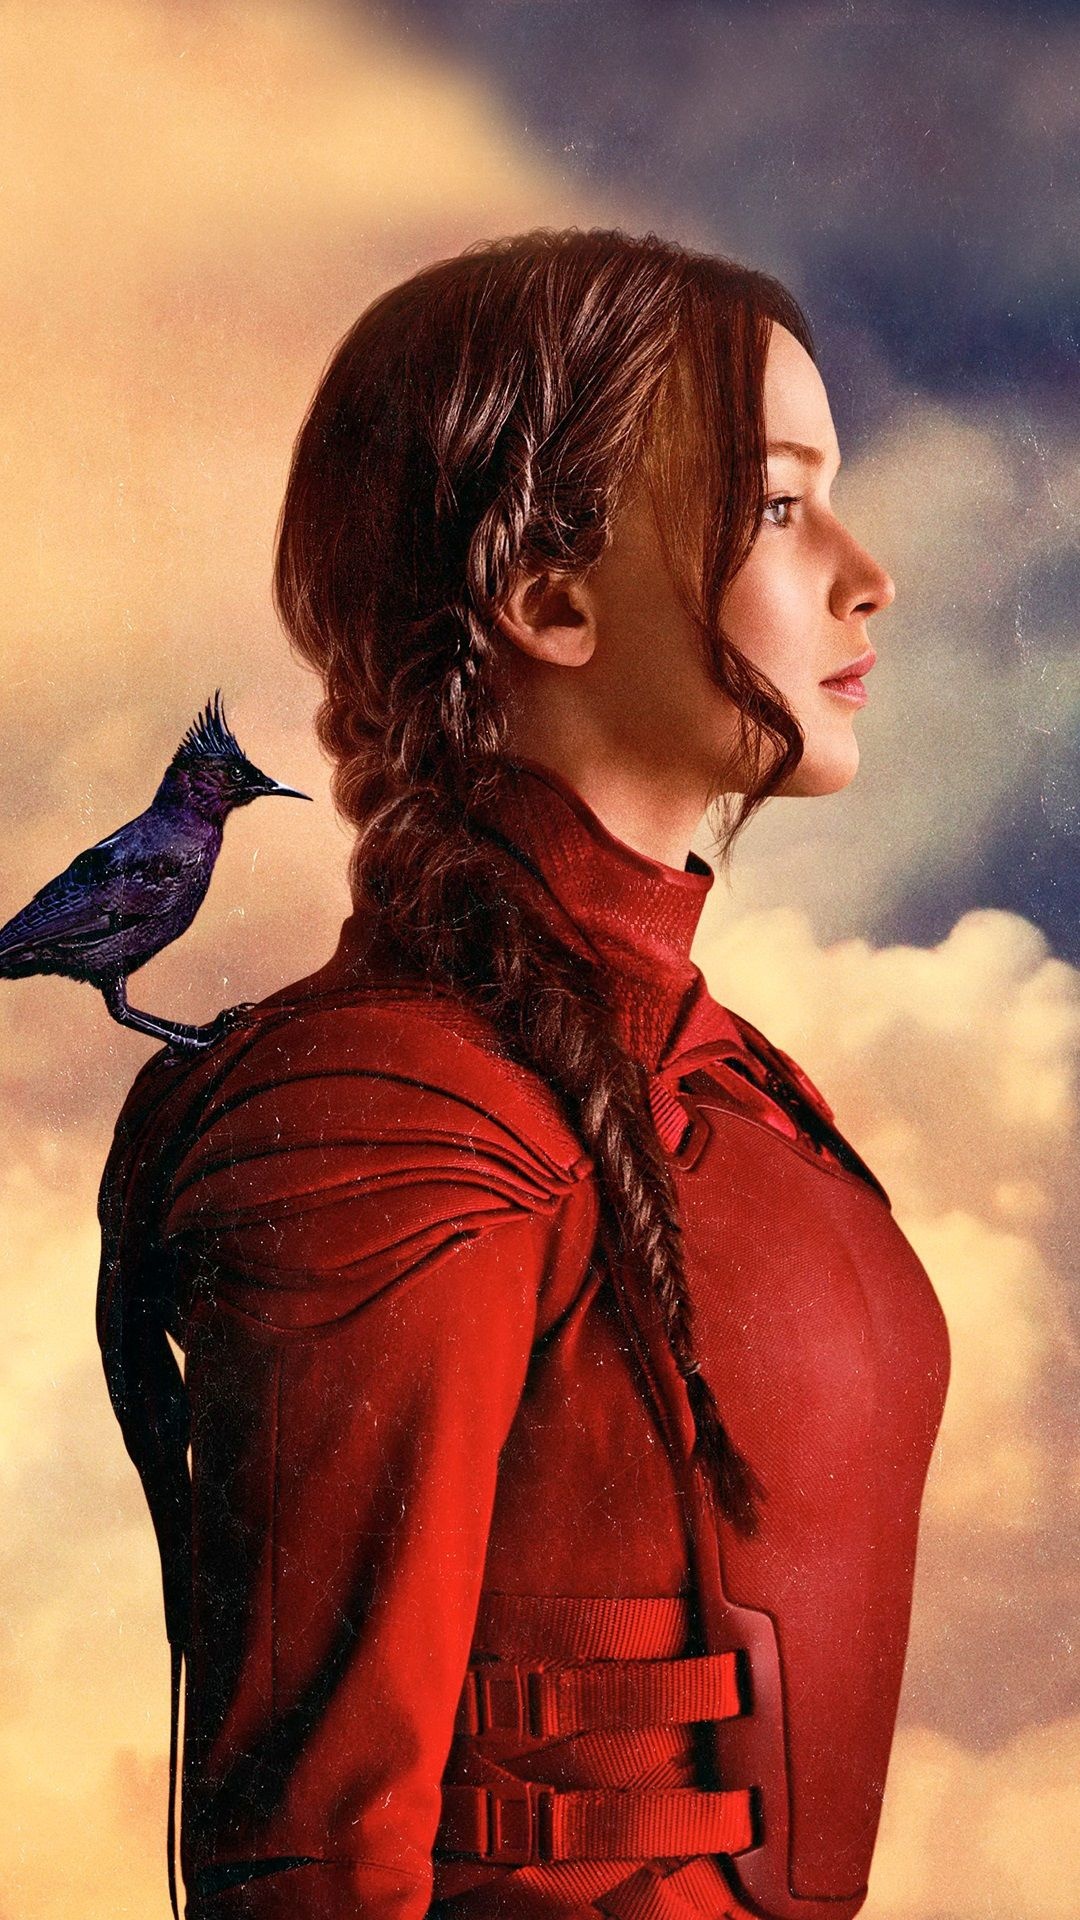 Jennifer Lawrence, The Hunger Games, iPhone wallpaper, Hunger Games poster, 1080x1920 Full HD Handy